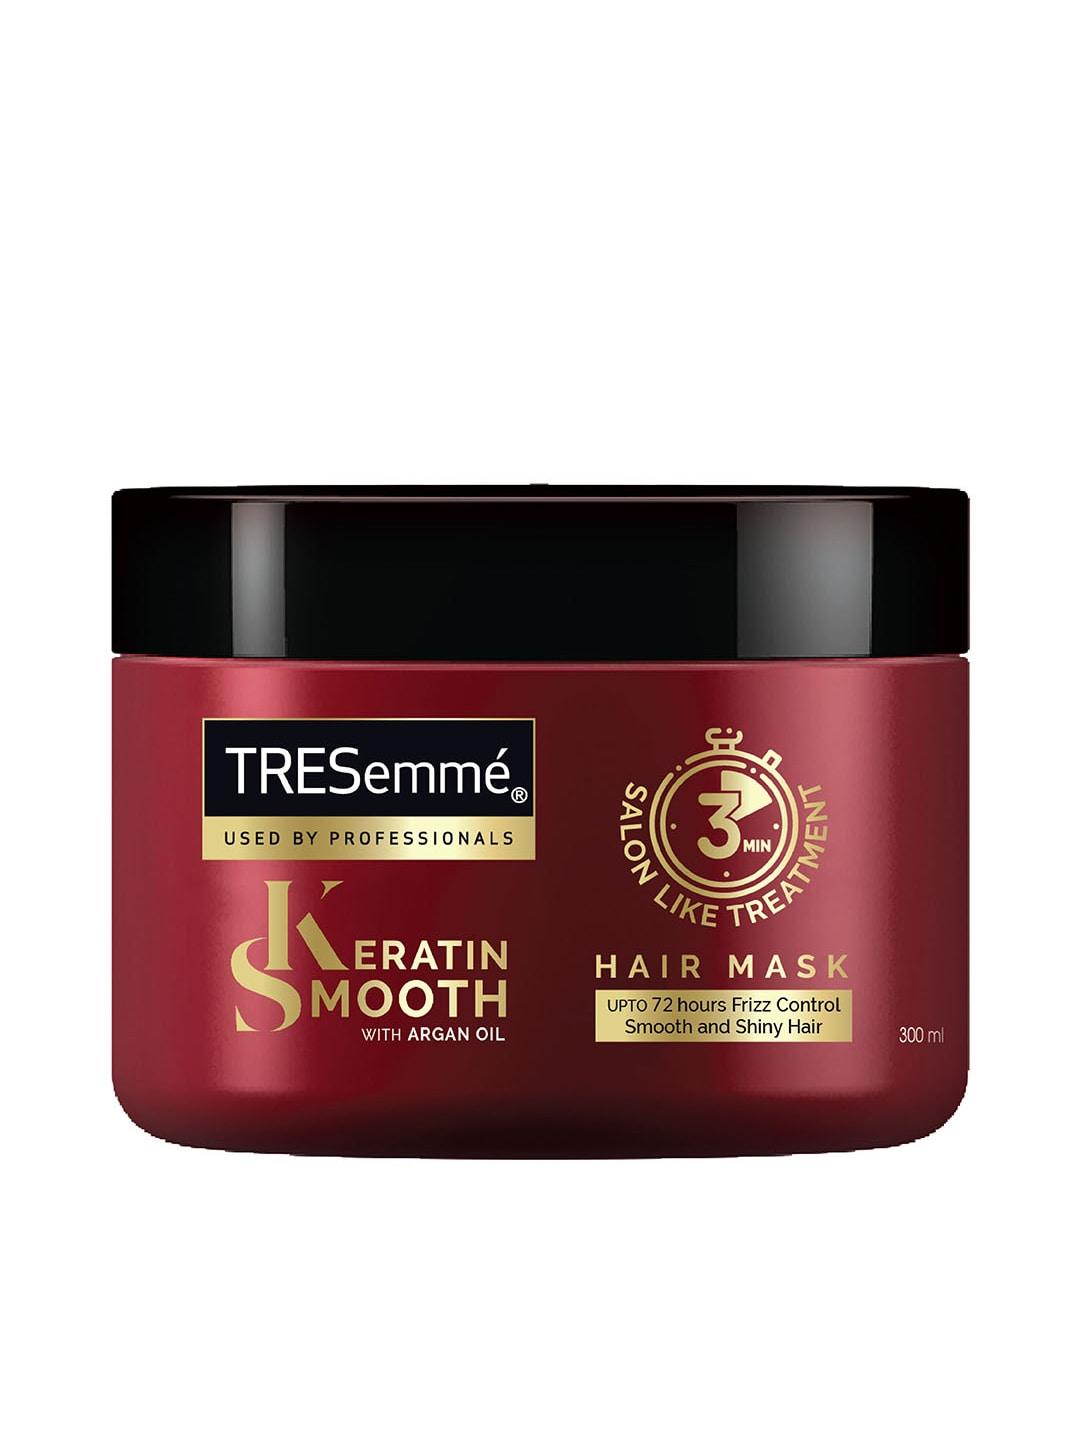 TRESemme Keratin Smooth Deep Smoothing Mask with Argan Oil - 300ml